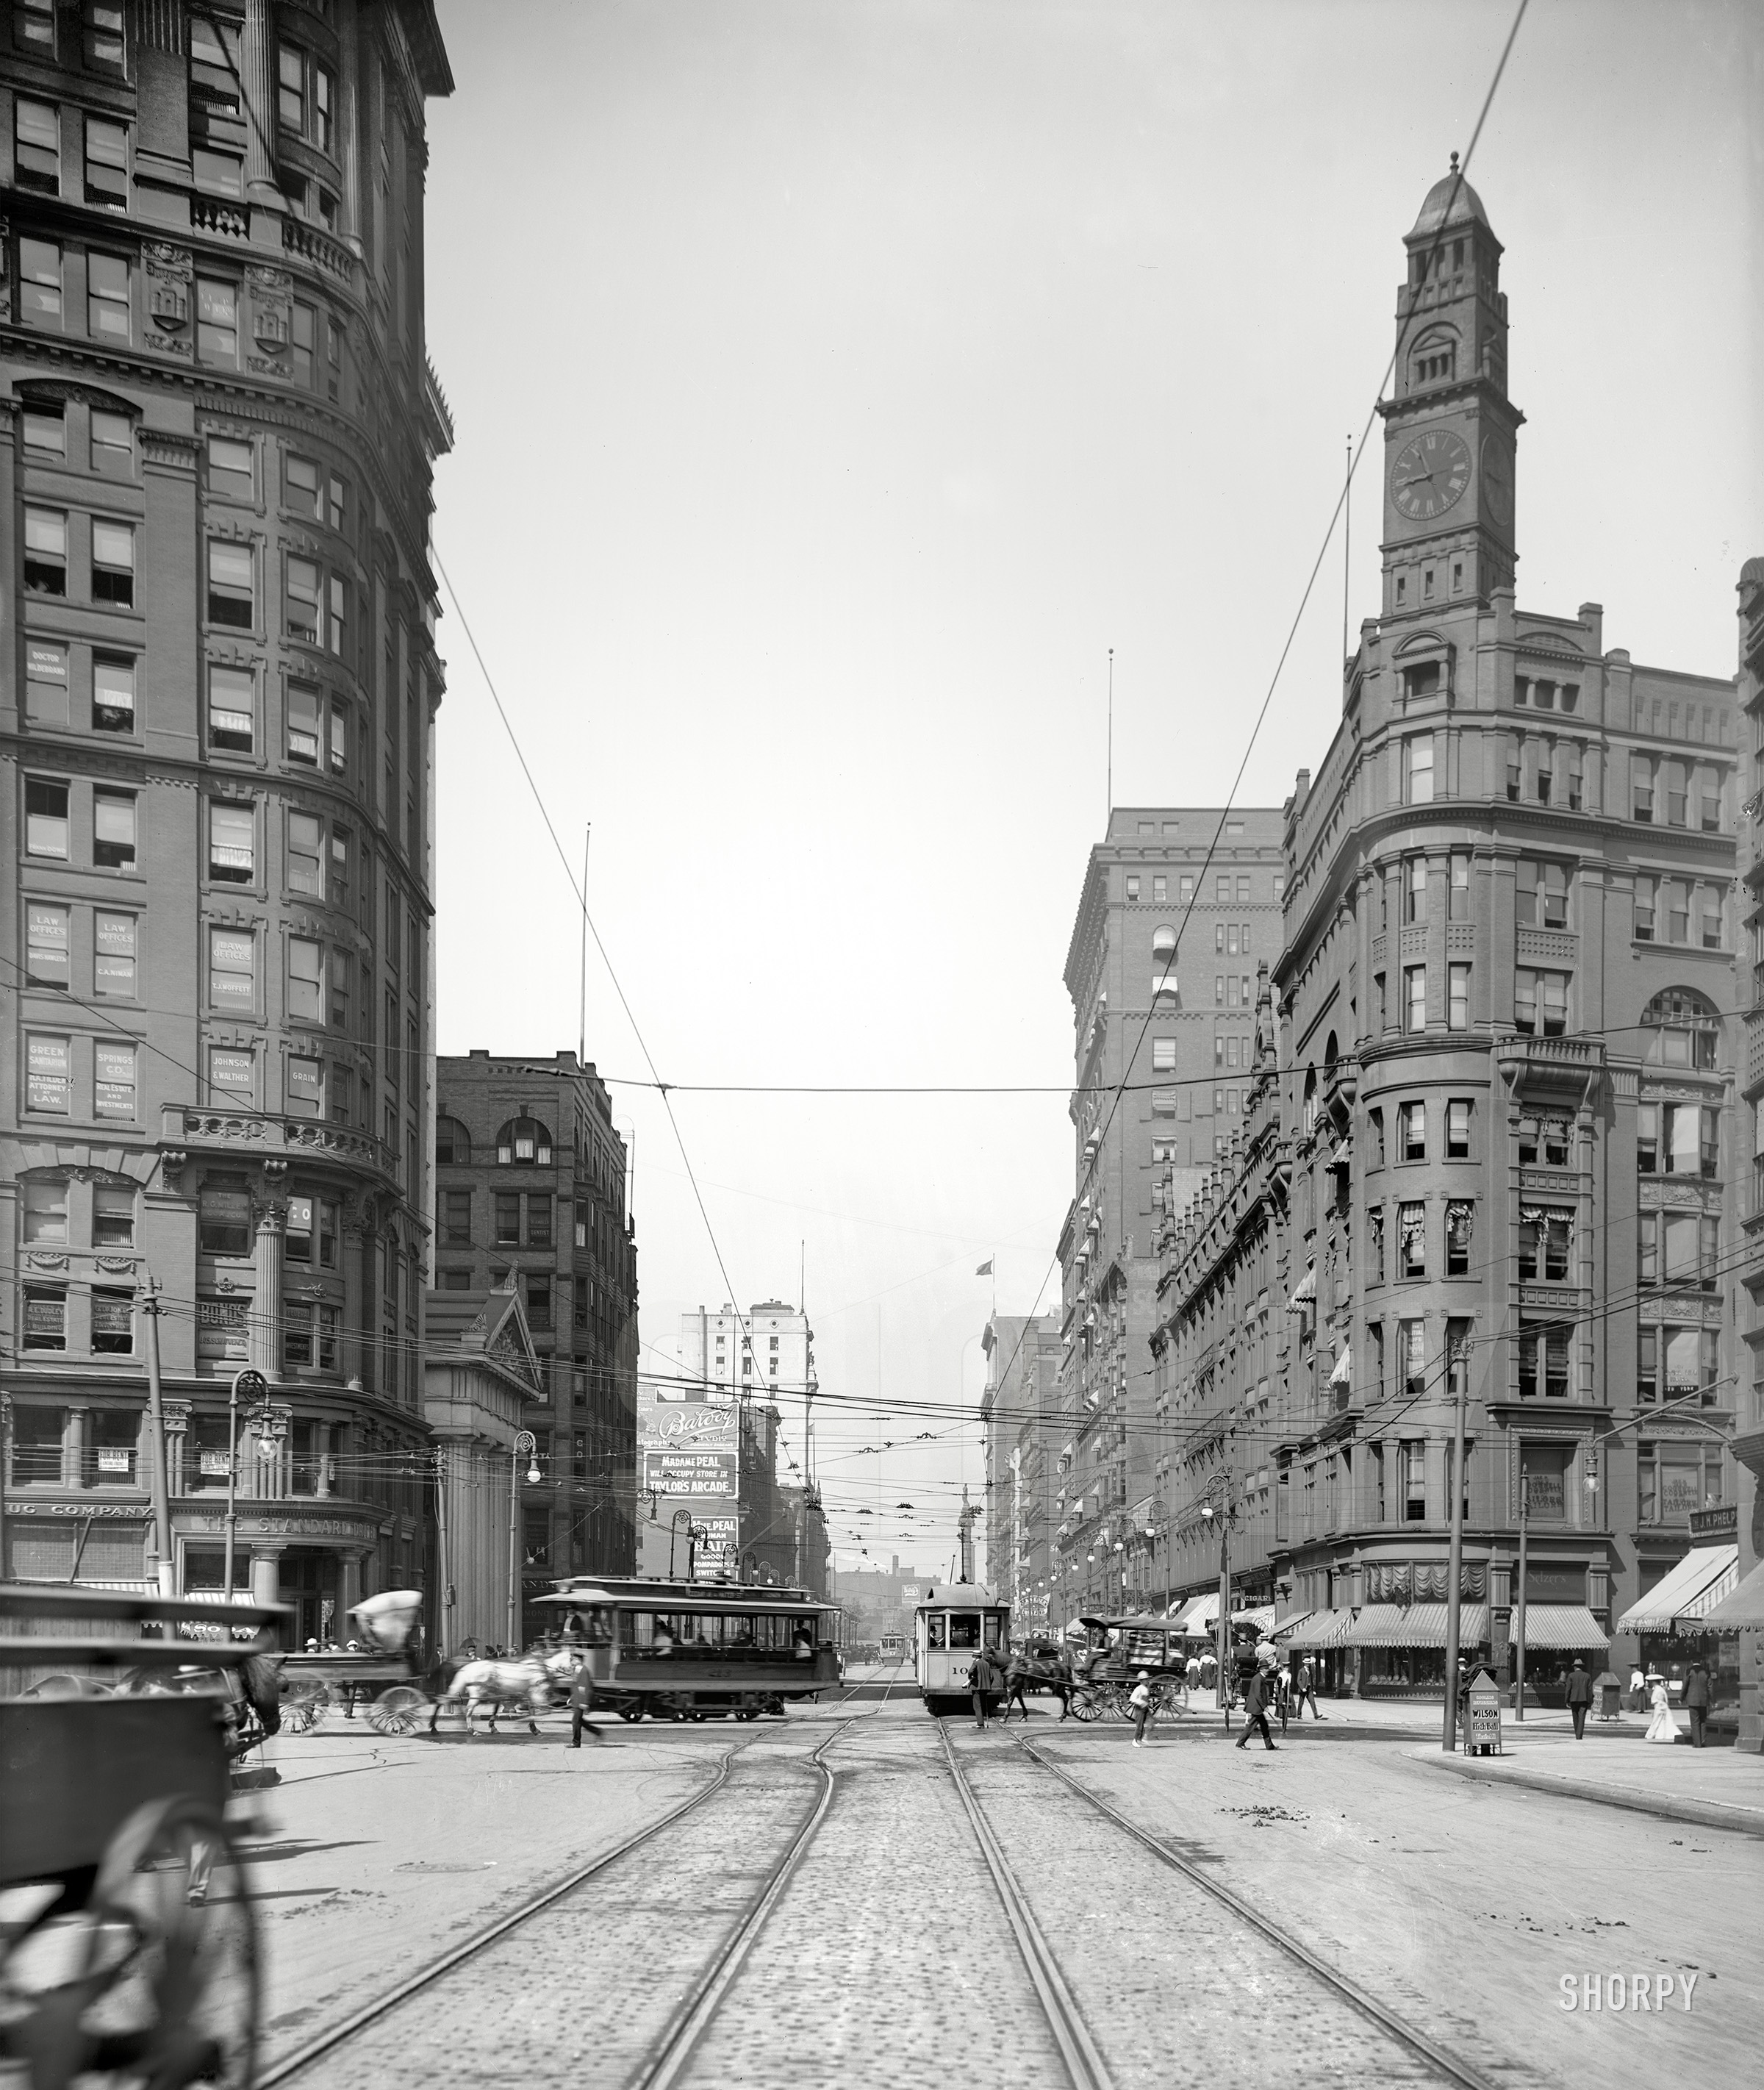 Circa 1905. "Euclid Avenue, Cleveland, O." The clock tower belongs to the Hickox Building (1890-1946), at the intersection with East Ninth Street. 8x10 inch dry plate glass negative, Detroit Publishing Company. View full size.